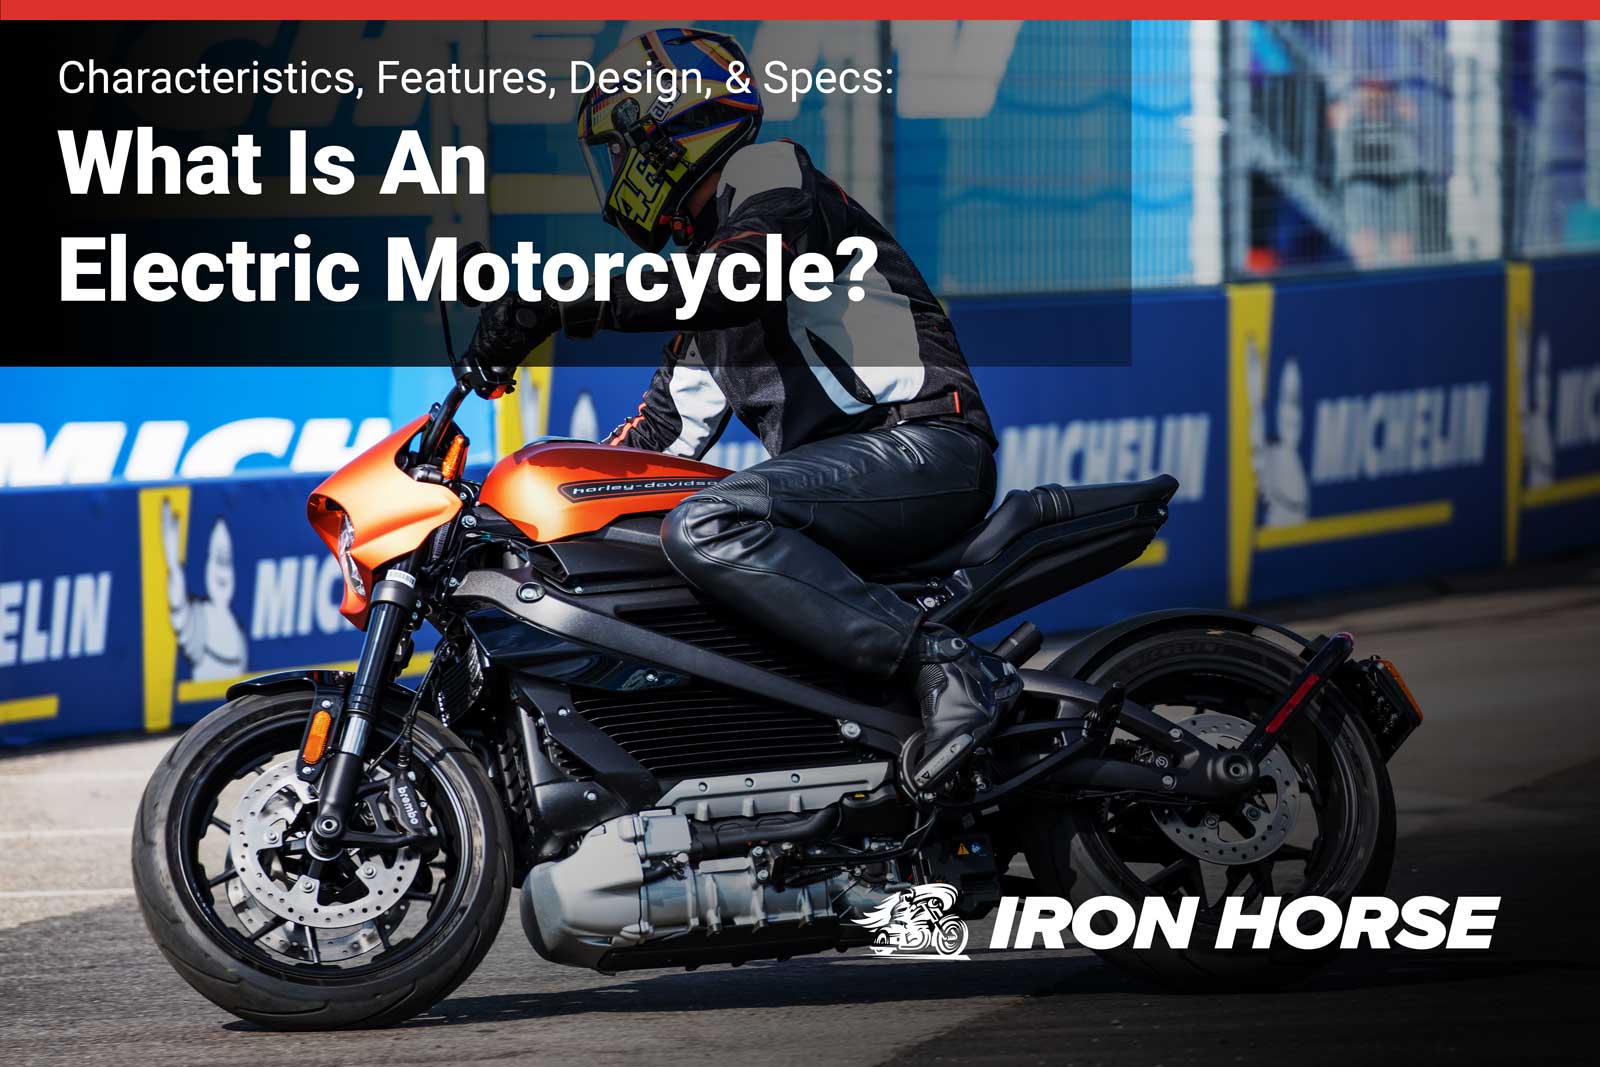 What is an electric motorcycle?